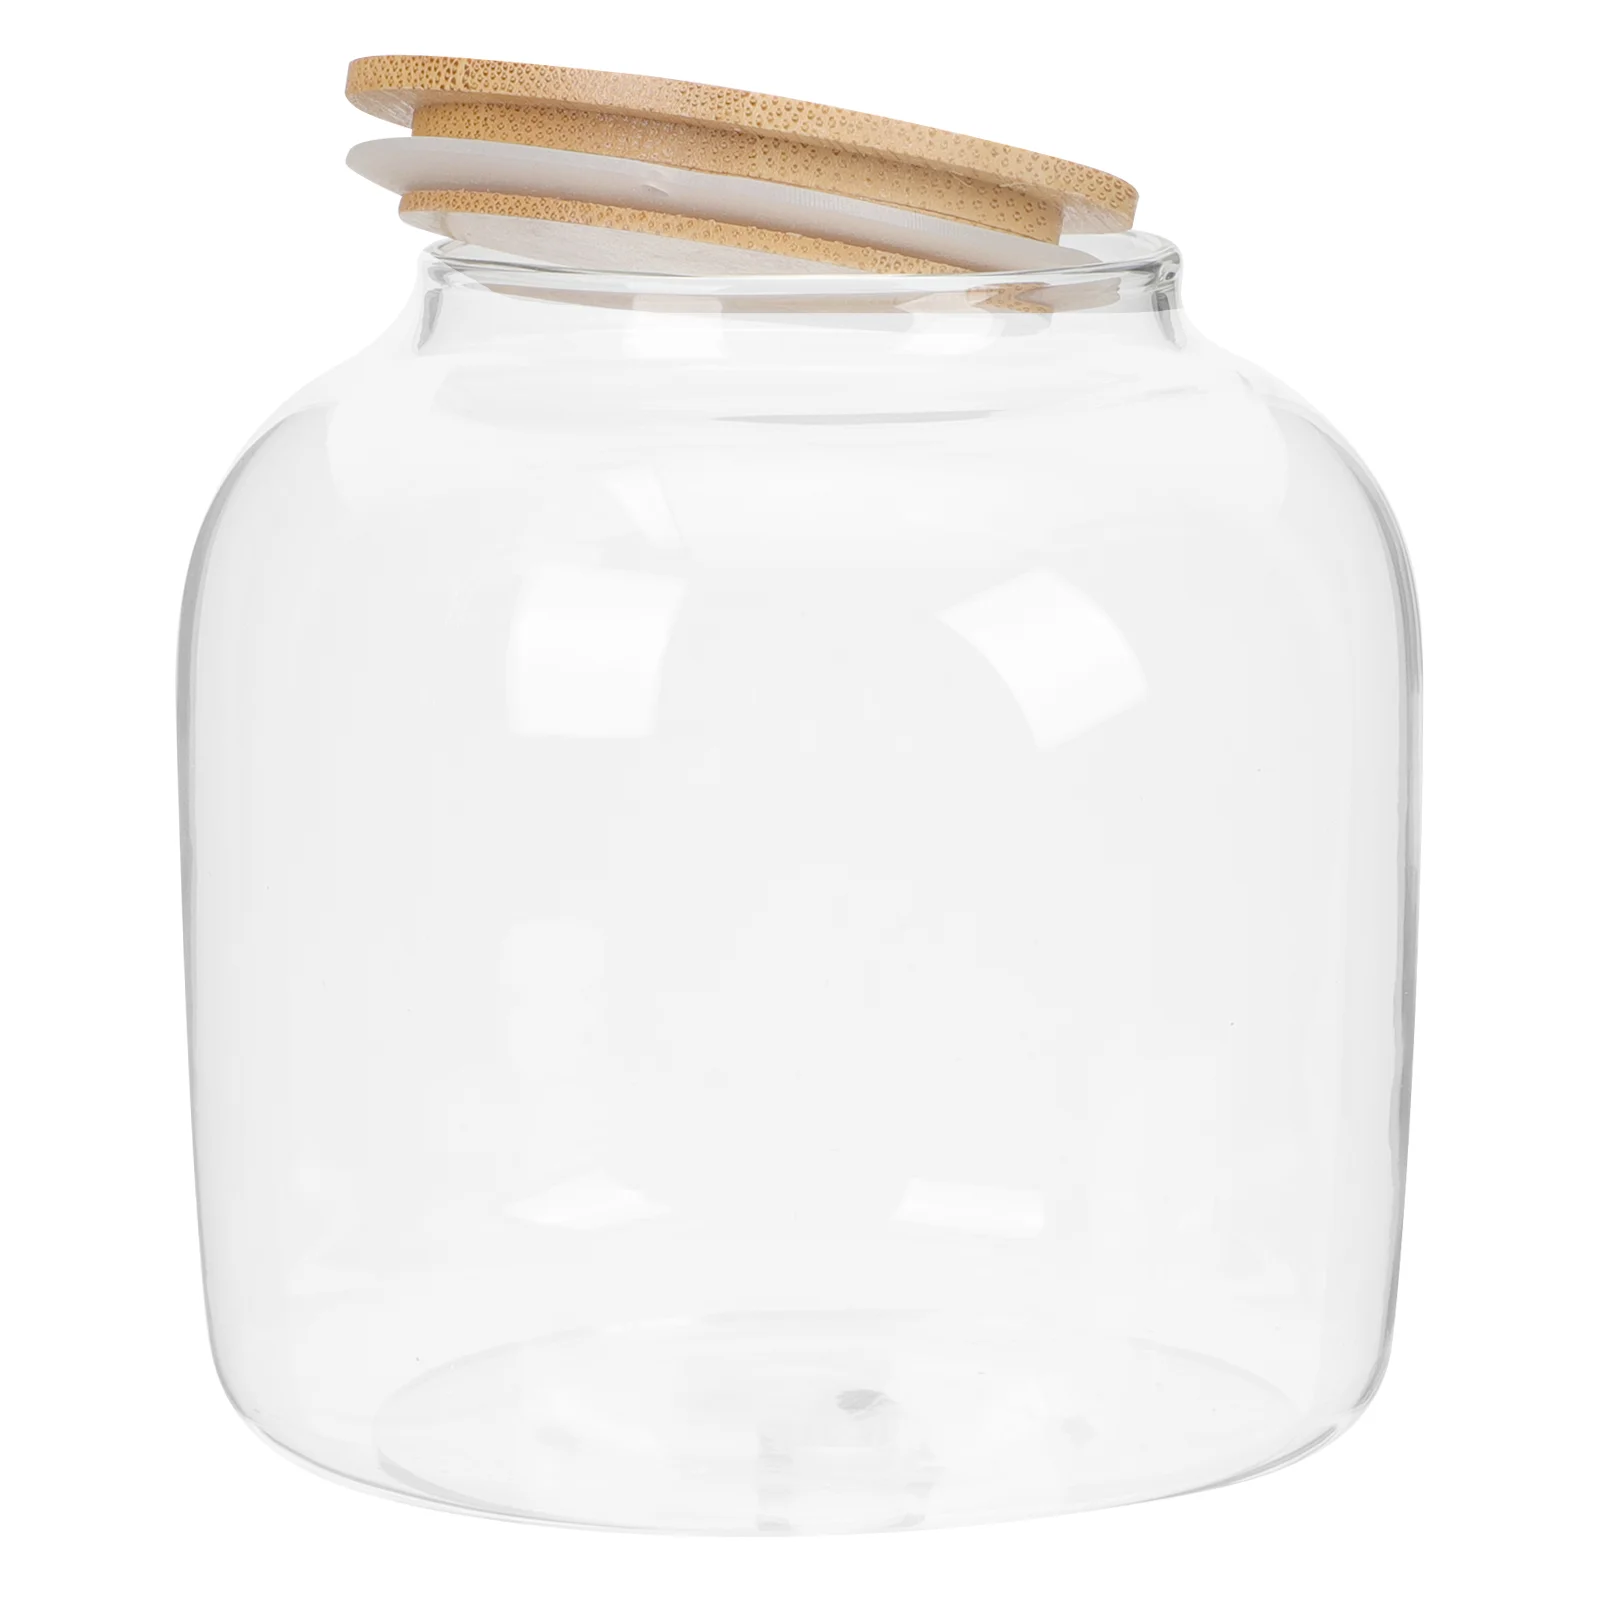 

Glass Tea Storage Jars Lids Cereal Containers Food Pantry Big Canister Bamboo Airtight Make & Canisters With